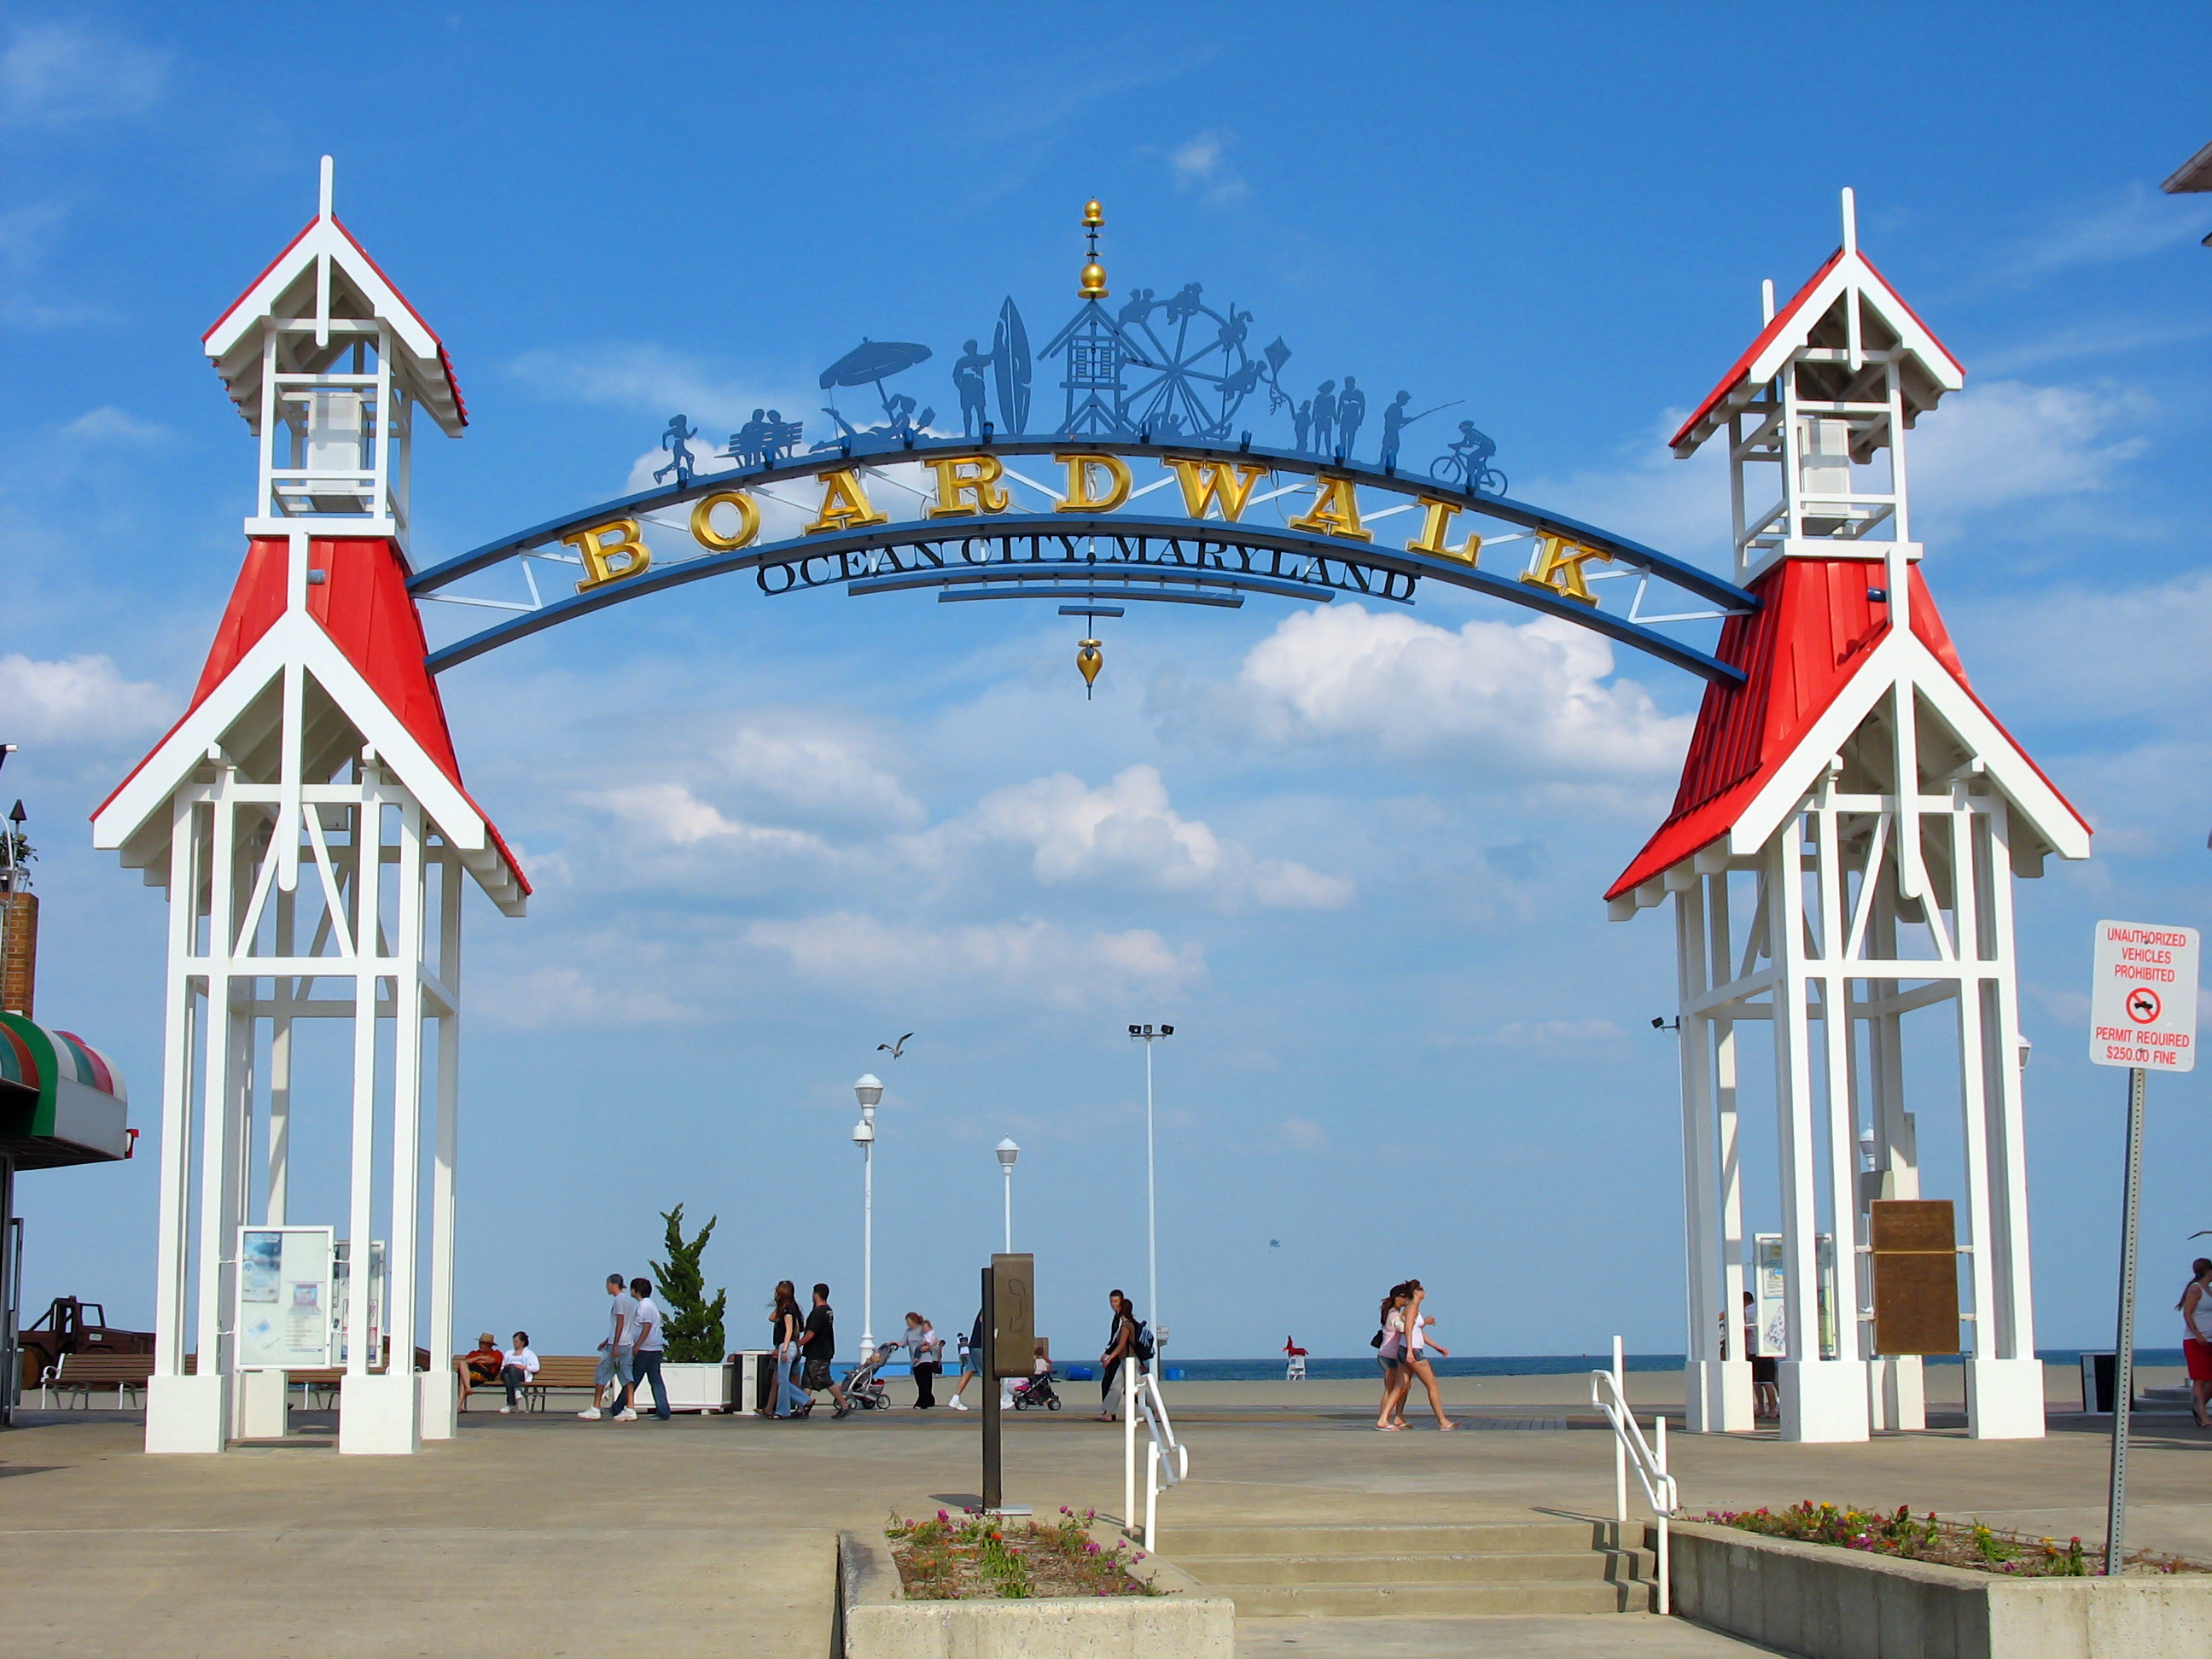 Best Things to Do in Ocean City, Maryland - Boardwalk in Ocean City, Maryland